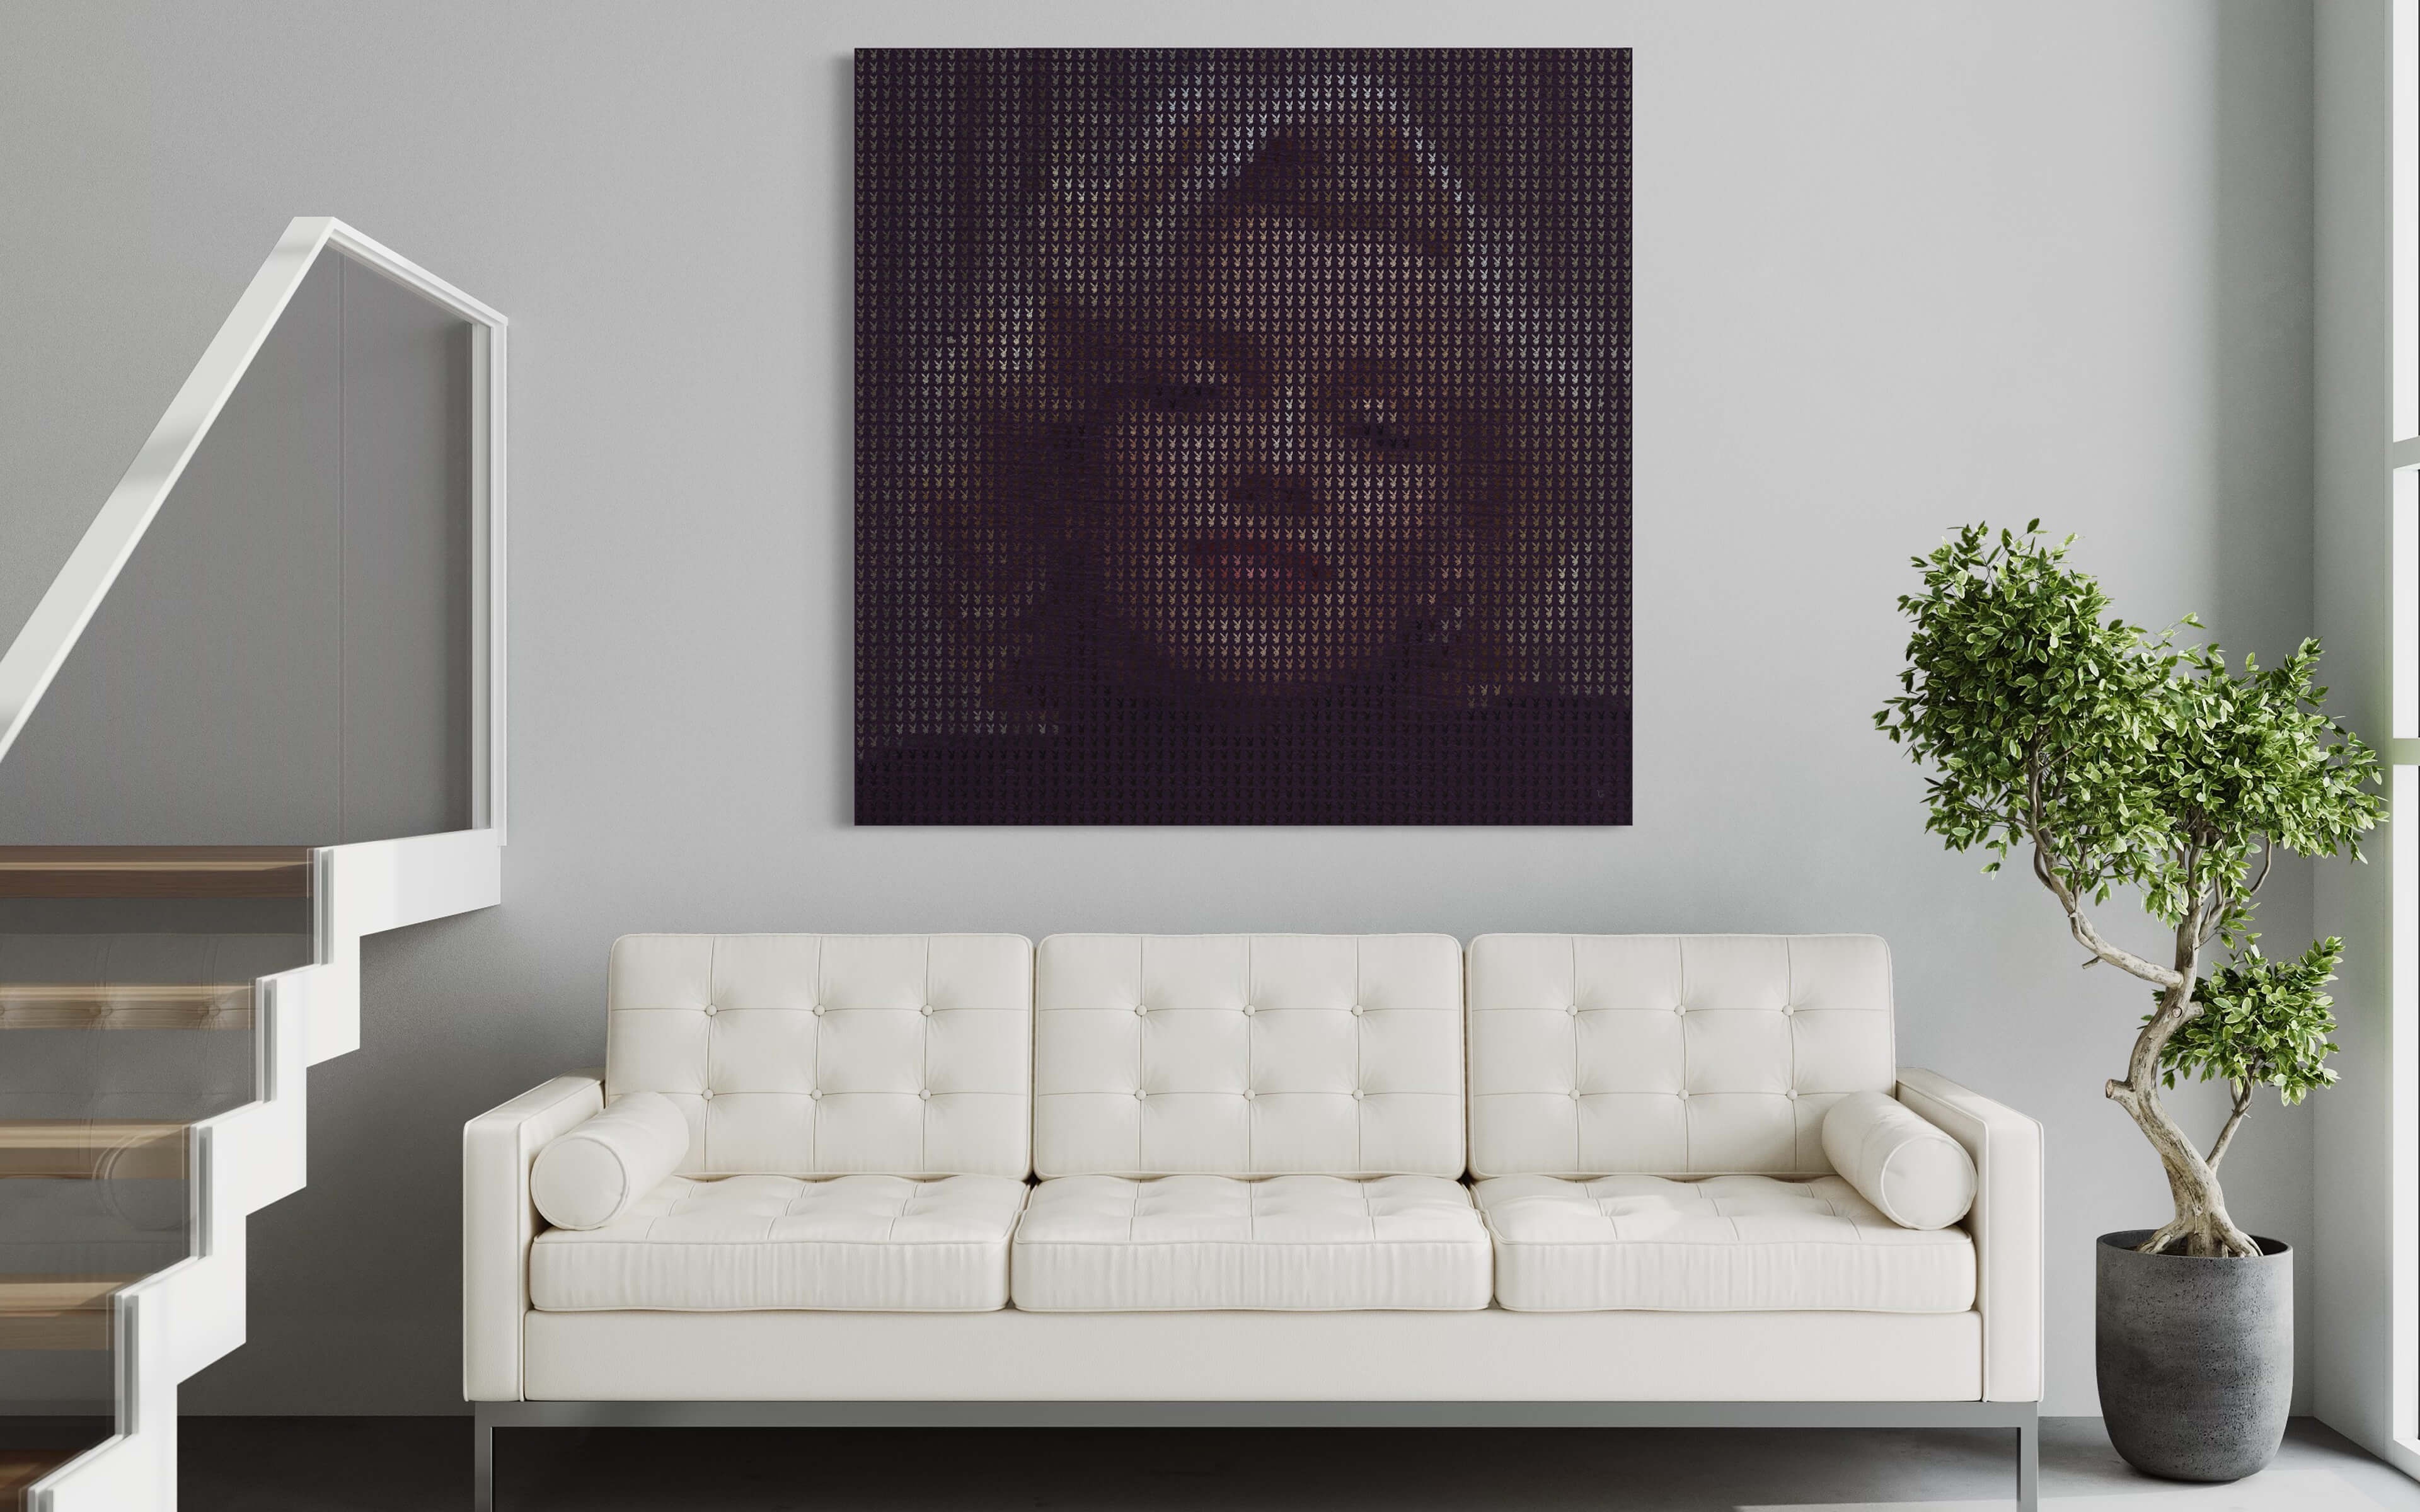 GriddyPop art of Marilyn Monroe hung over neutral couch in living room